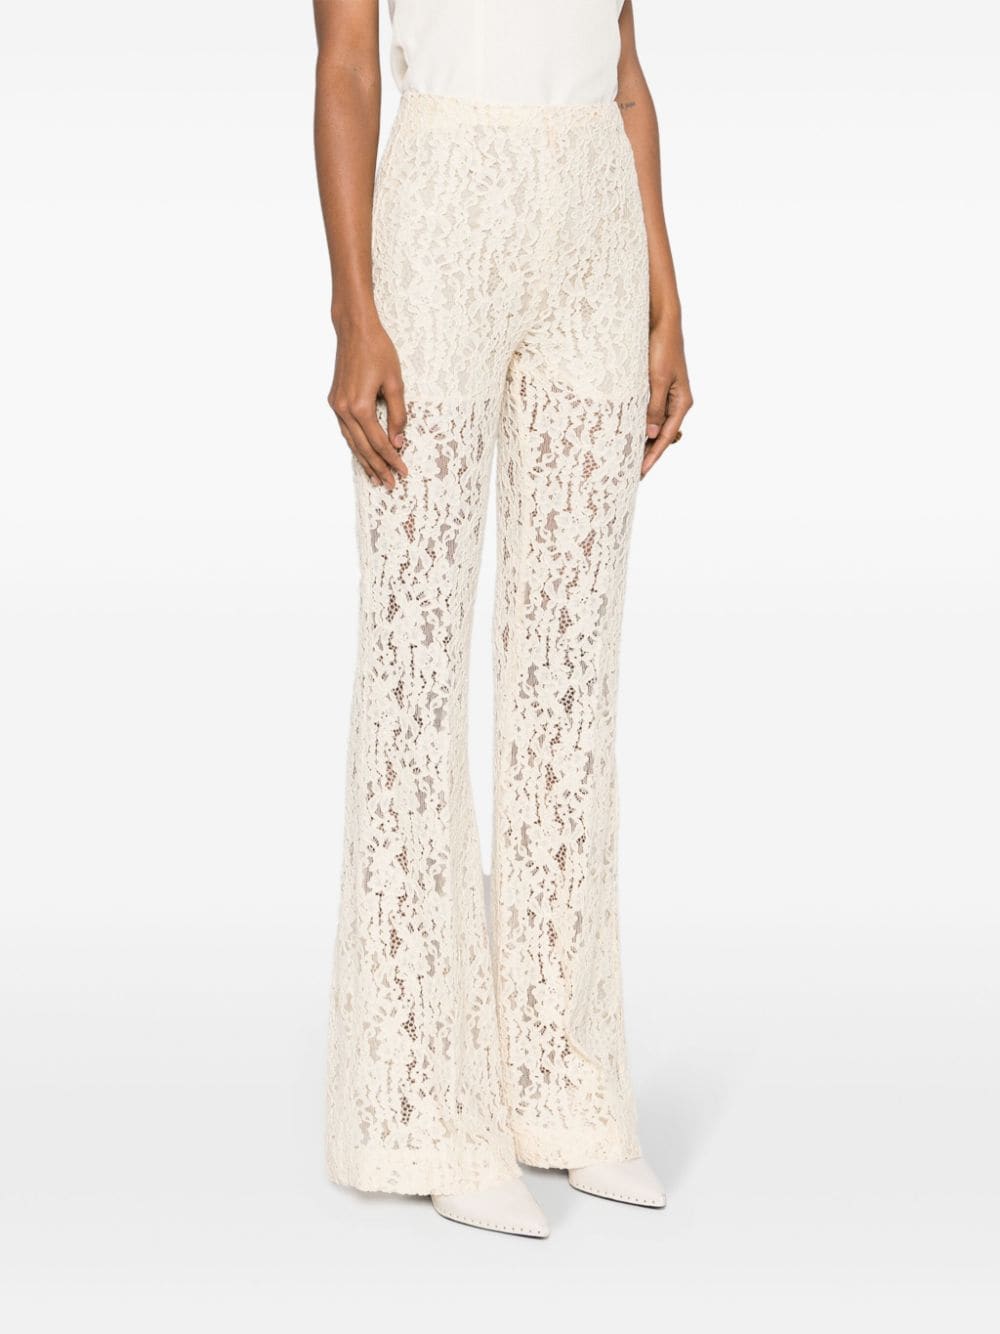 Lace trousers